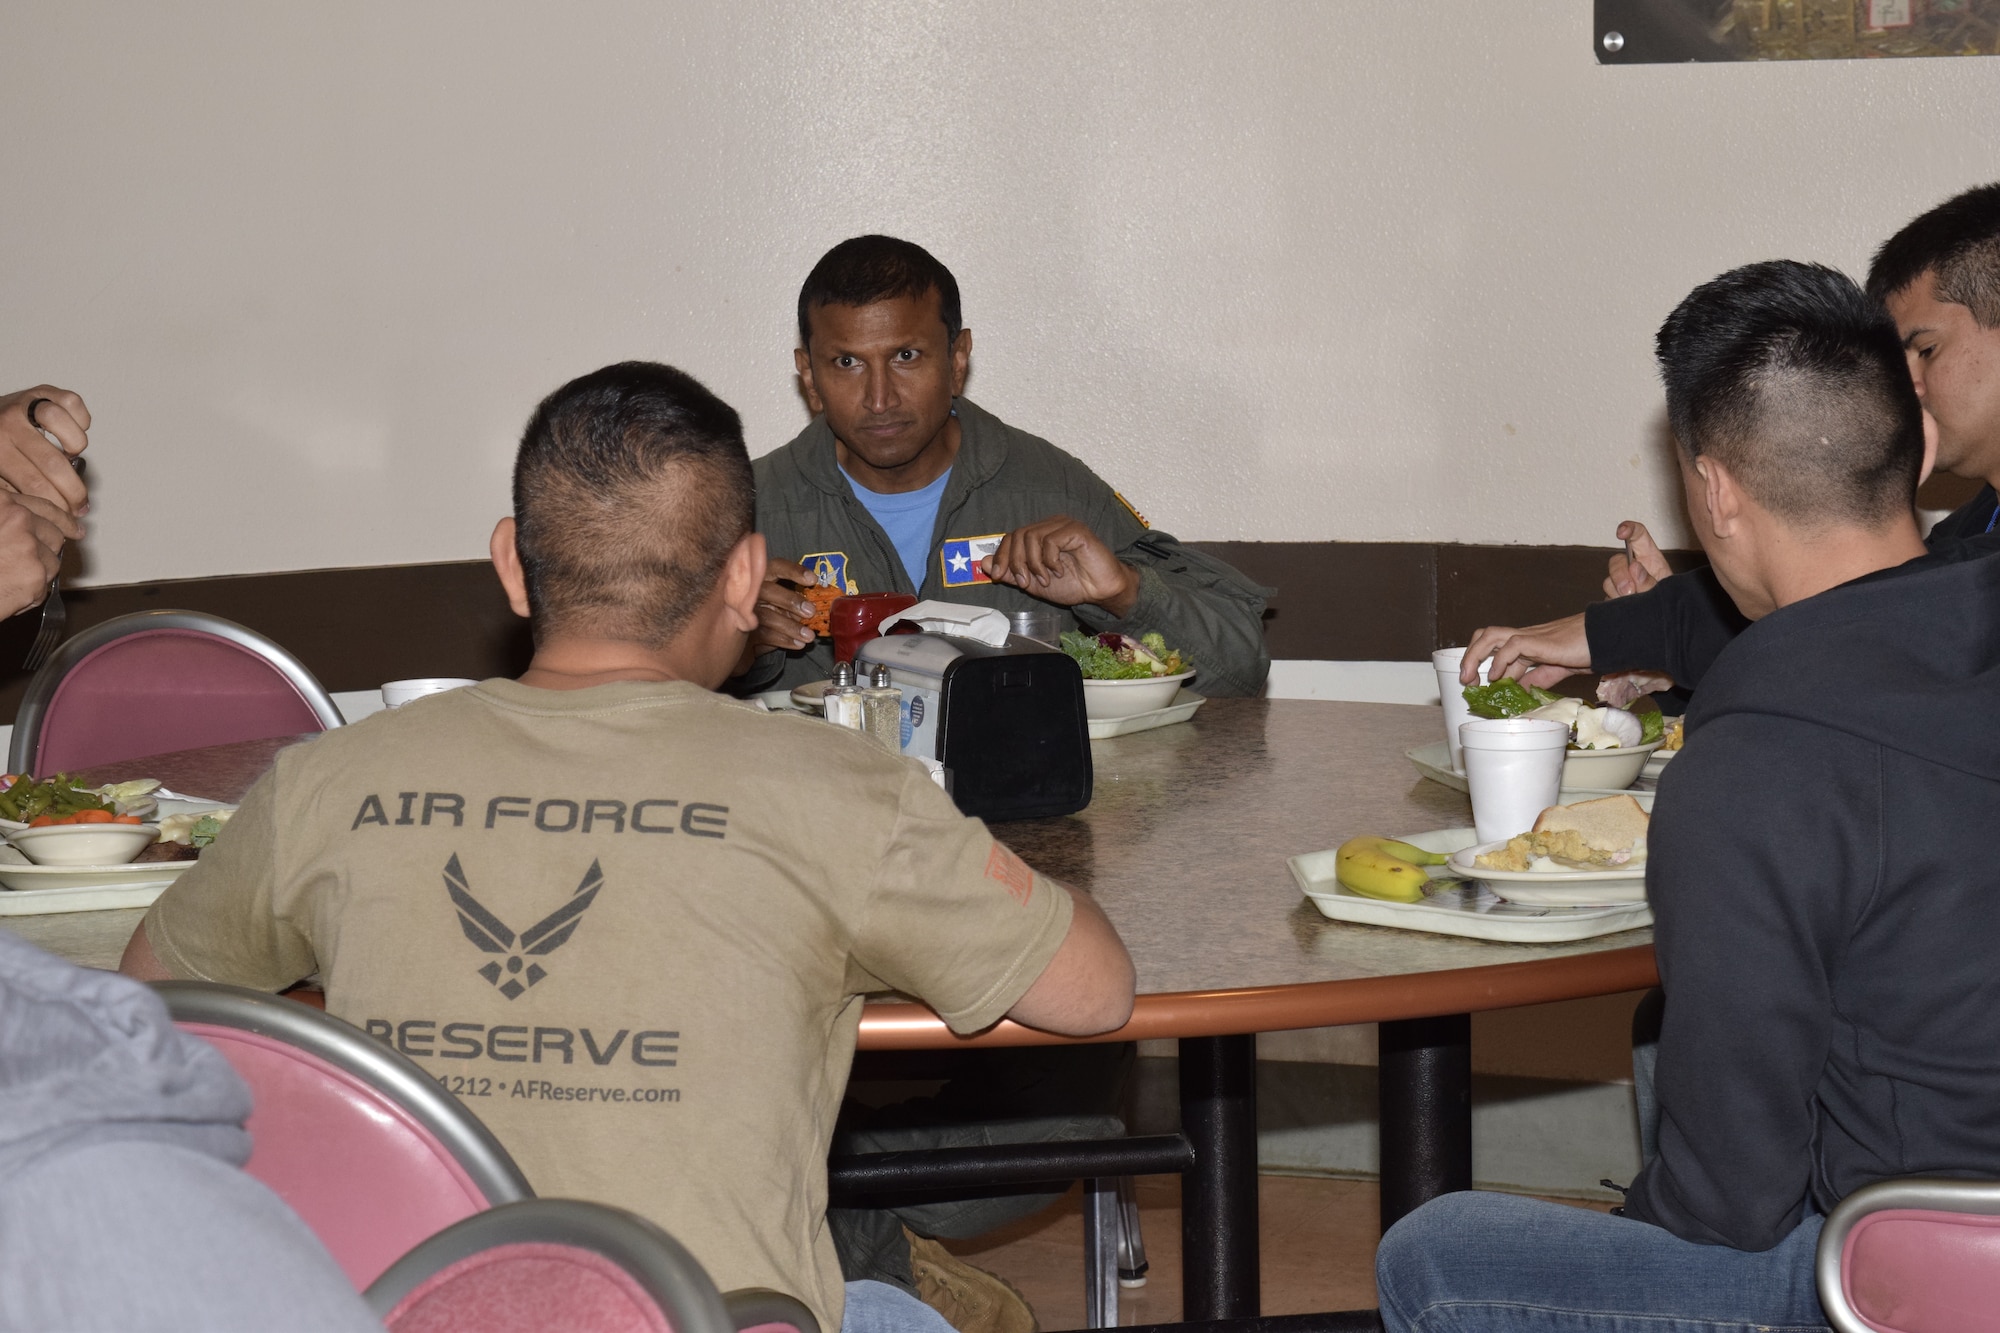 Col. Nikhil Patel, 433rd Airlift Wing vice commander, eats lunch with the Development and Training Flight members Nov. 6, 2021, at Joint Base San Antonio-Lackland, Texas. The D&TF program educates incoming Air Force members on military customs and connects them with the unit to help them transition from civilian to military service. (U.S. Air Force photo by Senior Airman Brittany Wich)